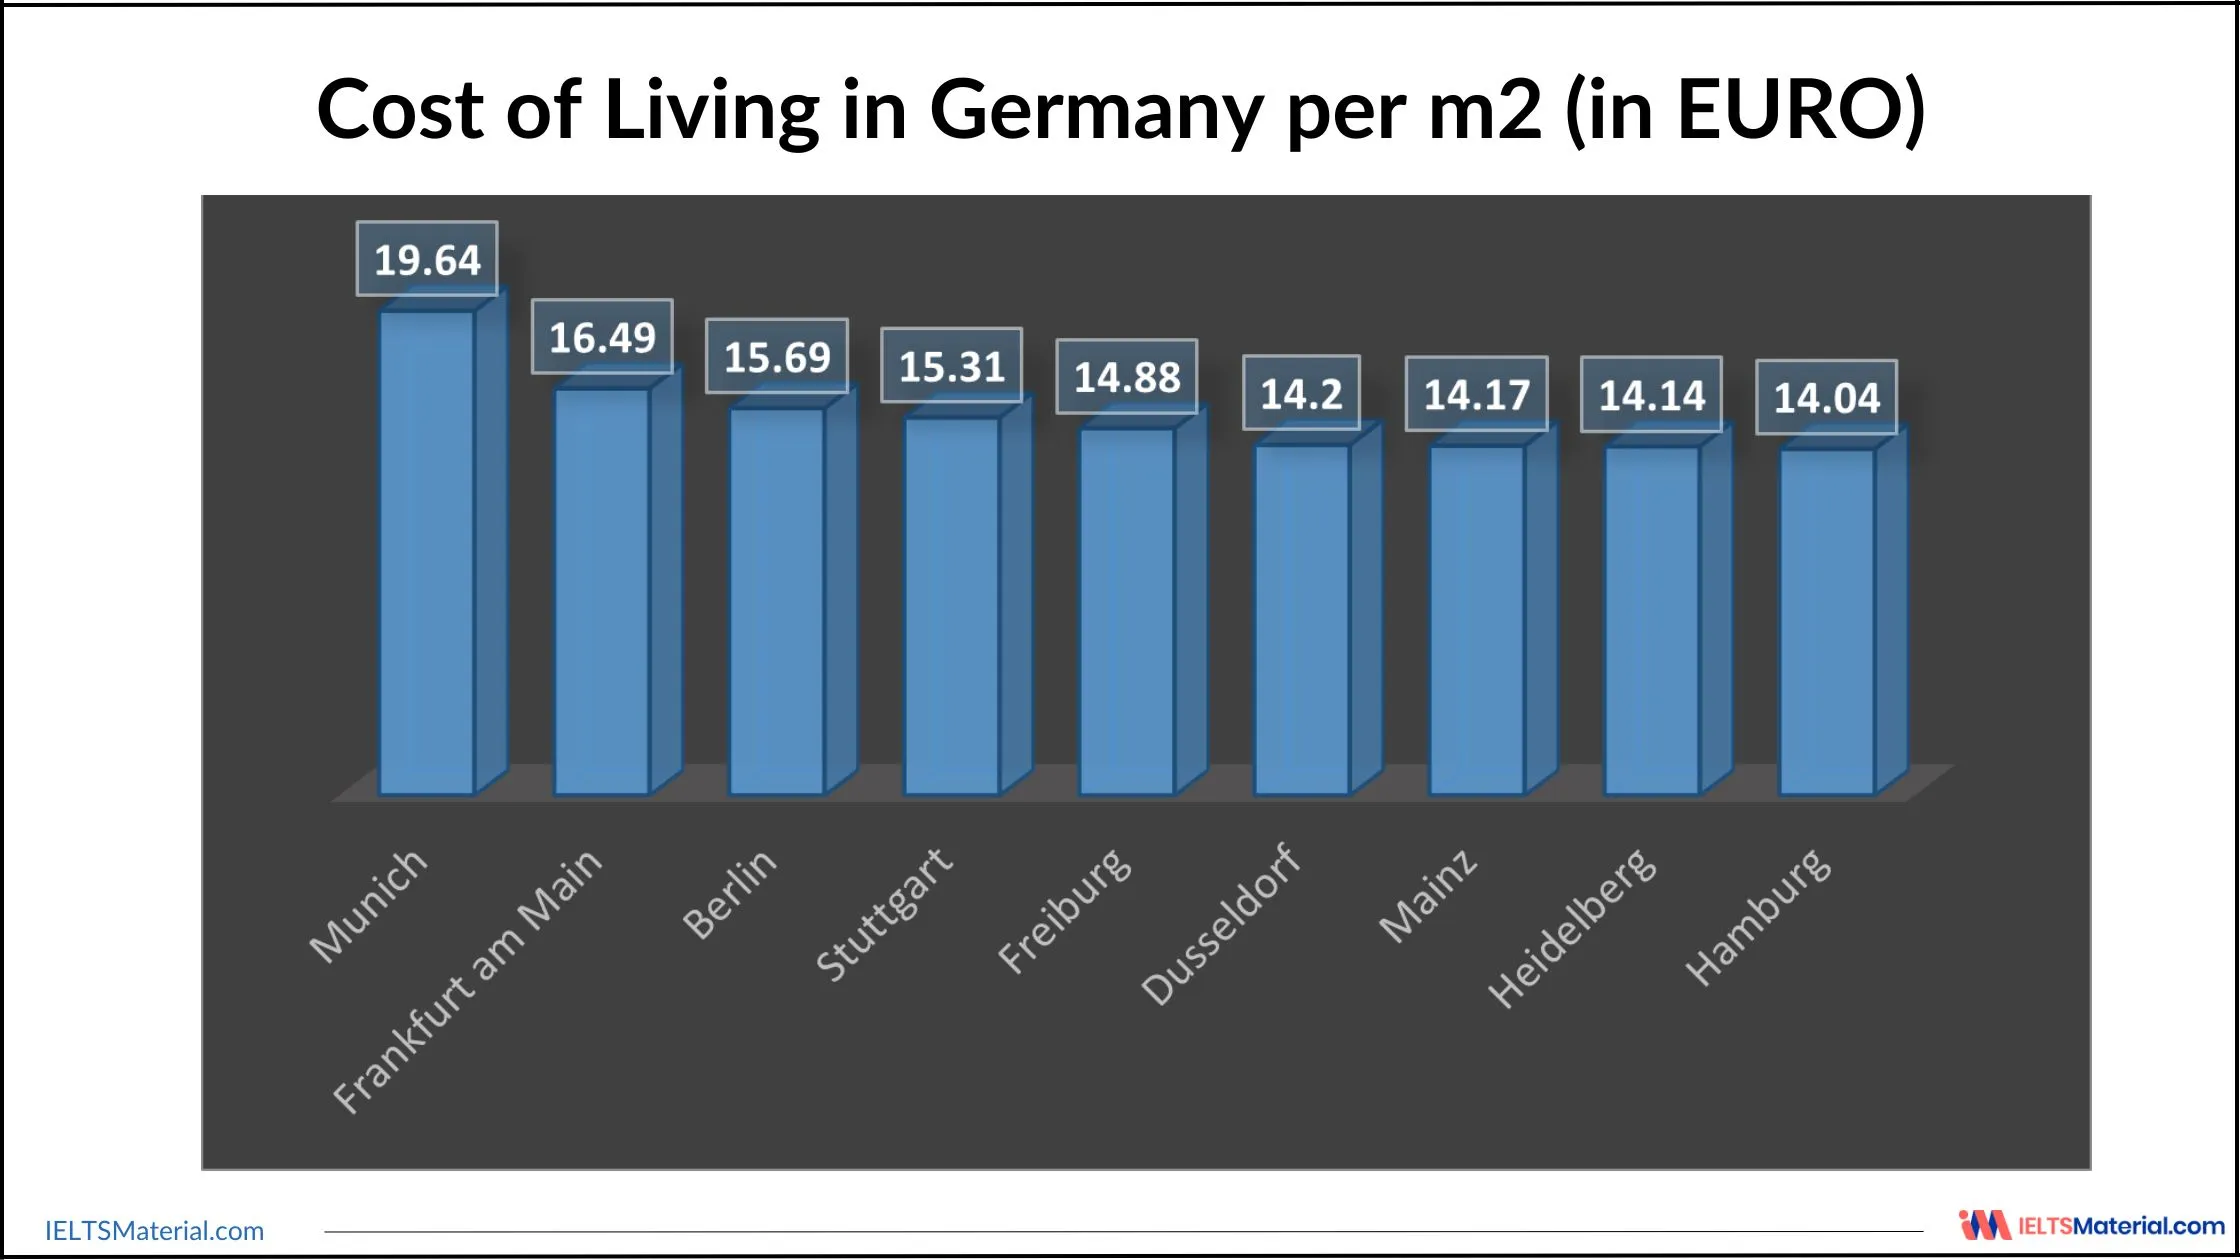 Germany Living Expenses in Different Cities per m2 (in EURO)